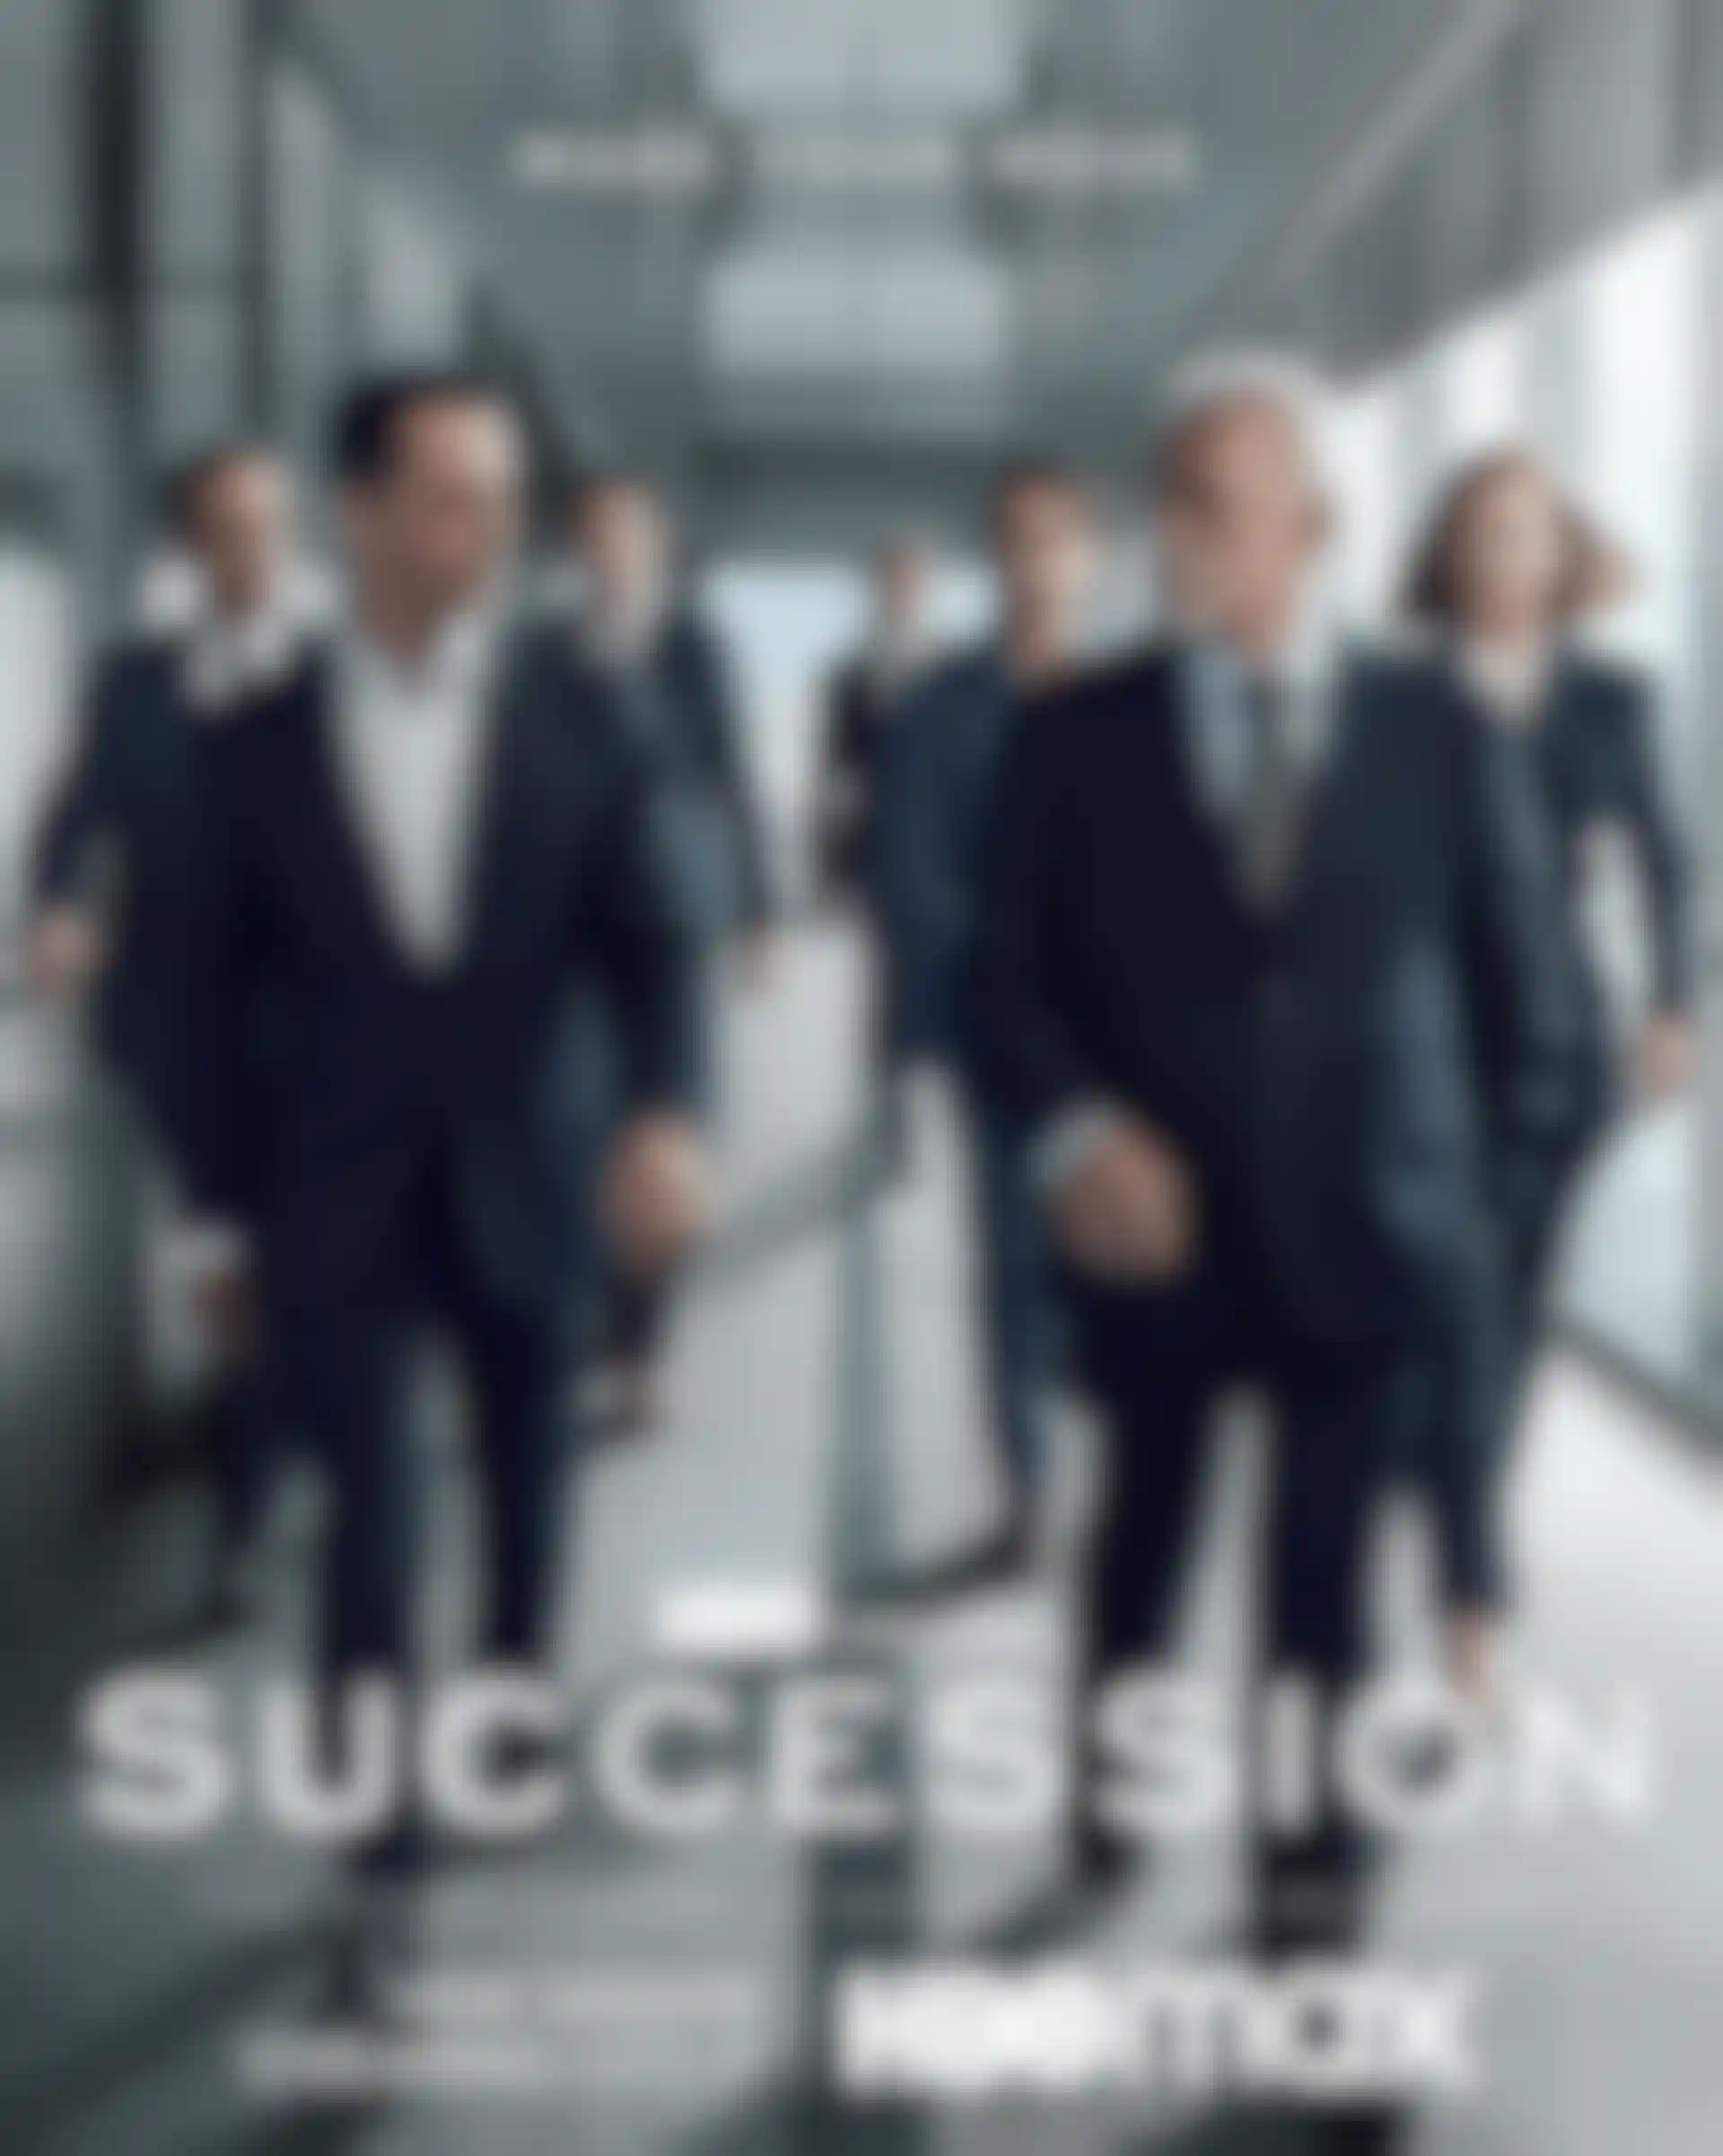 HBO's Succession - International versioning and dubbing